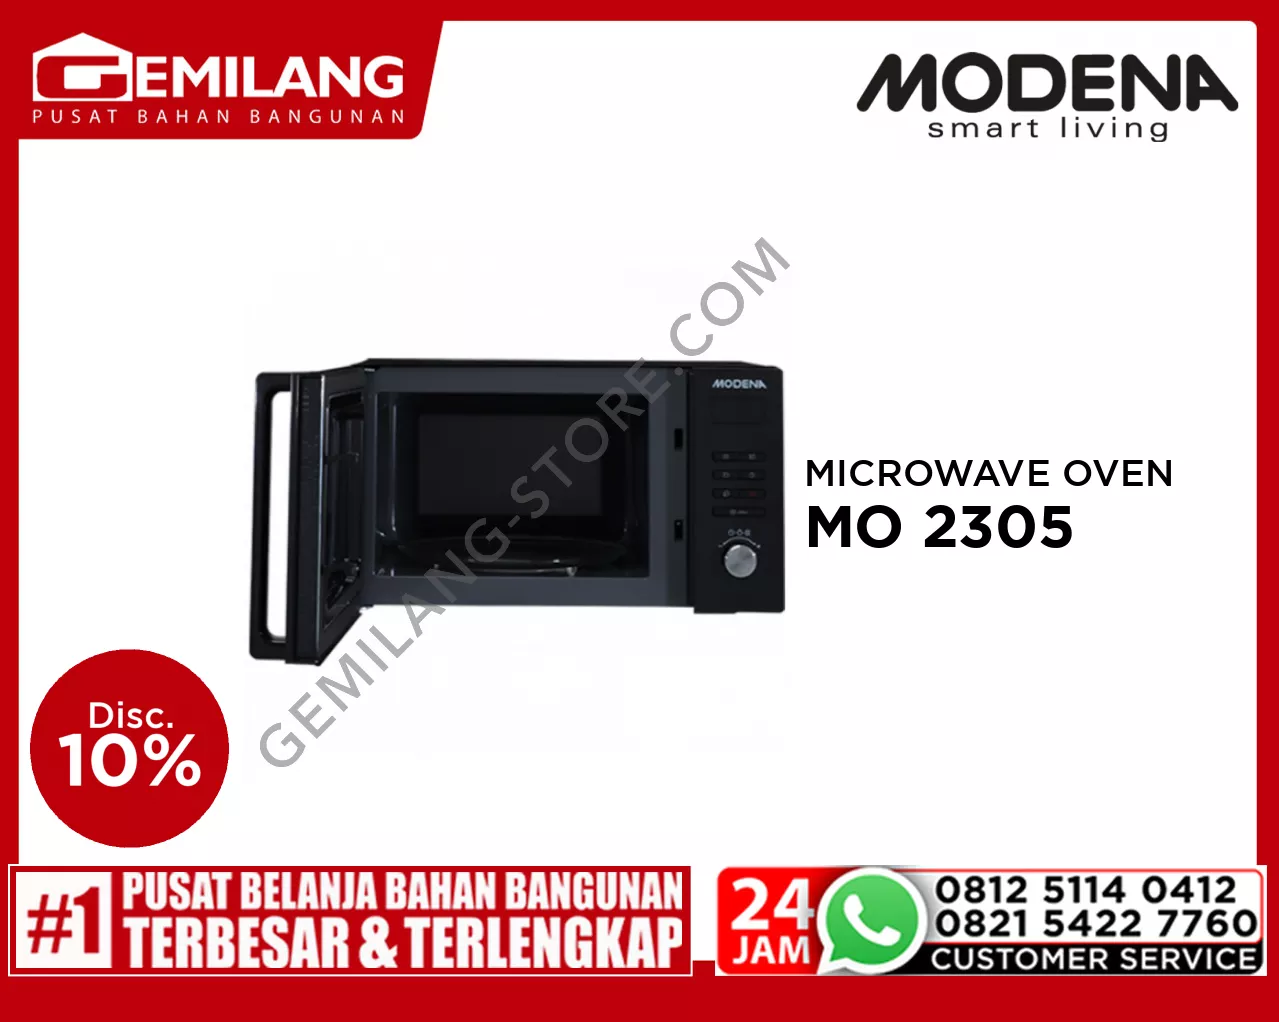 MODENA MICROWAVE OVEN MO 2305